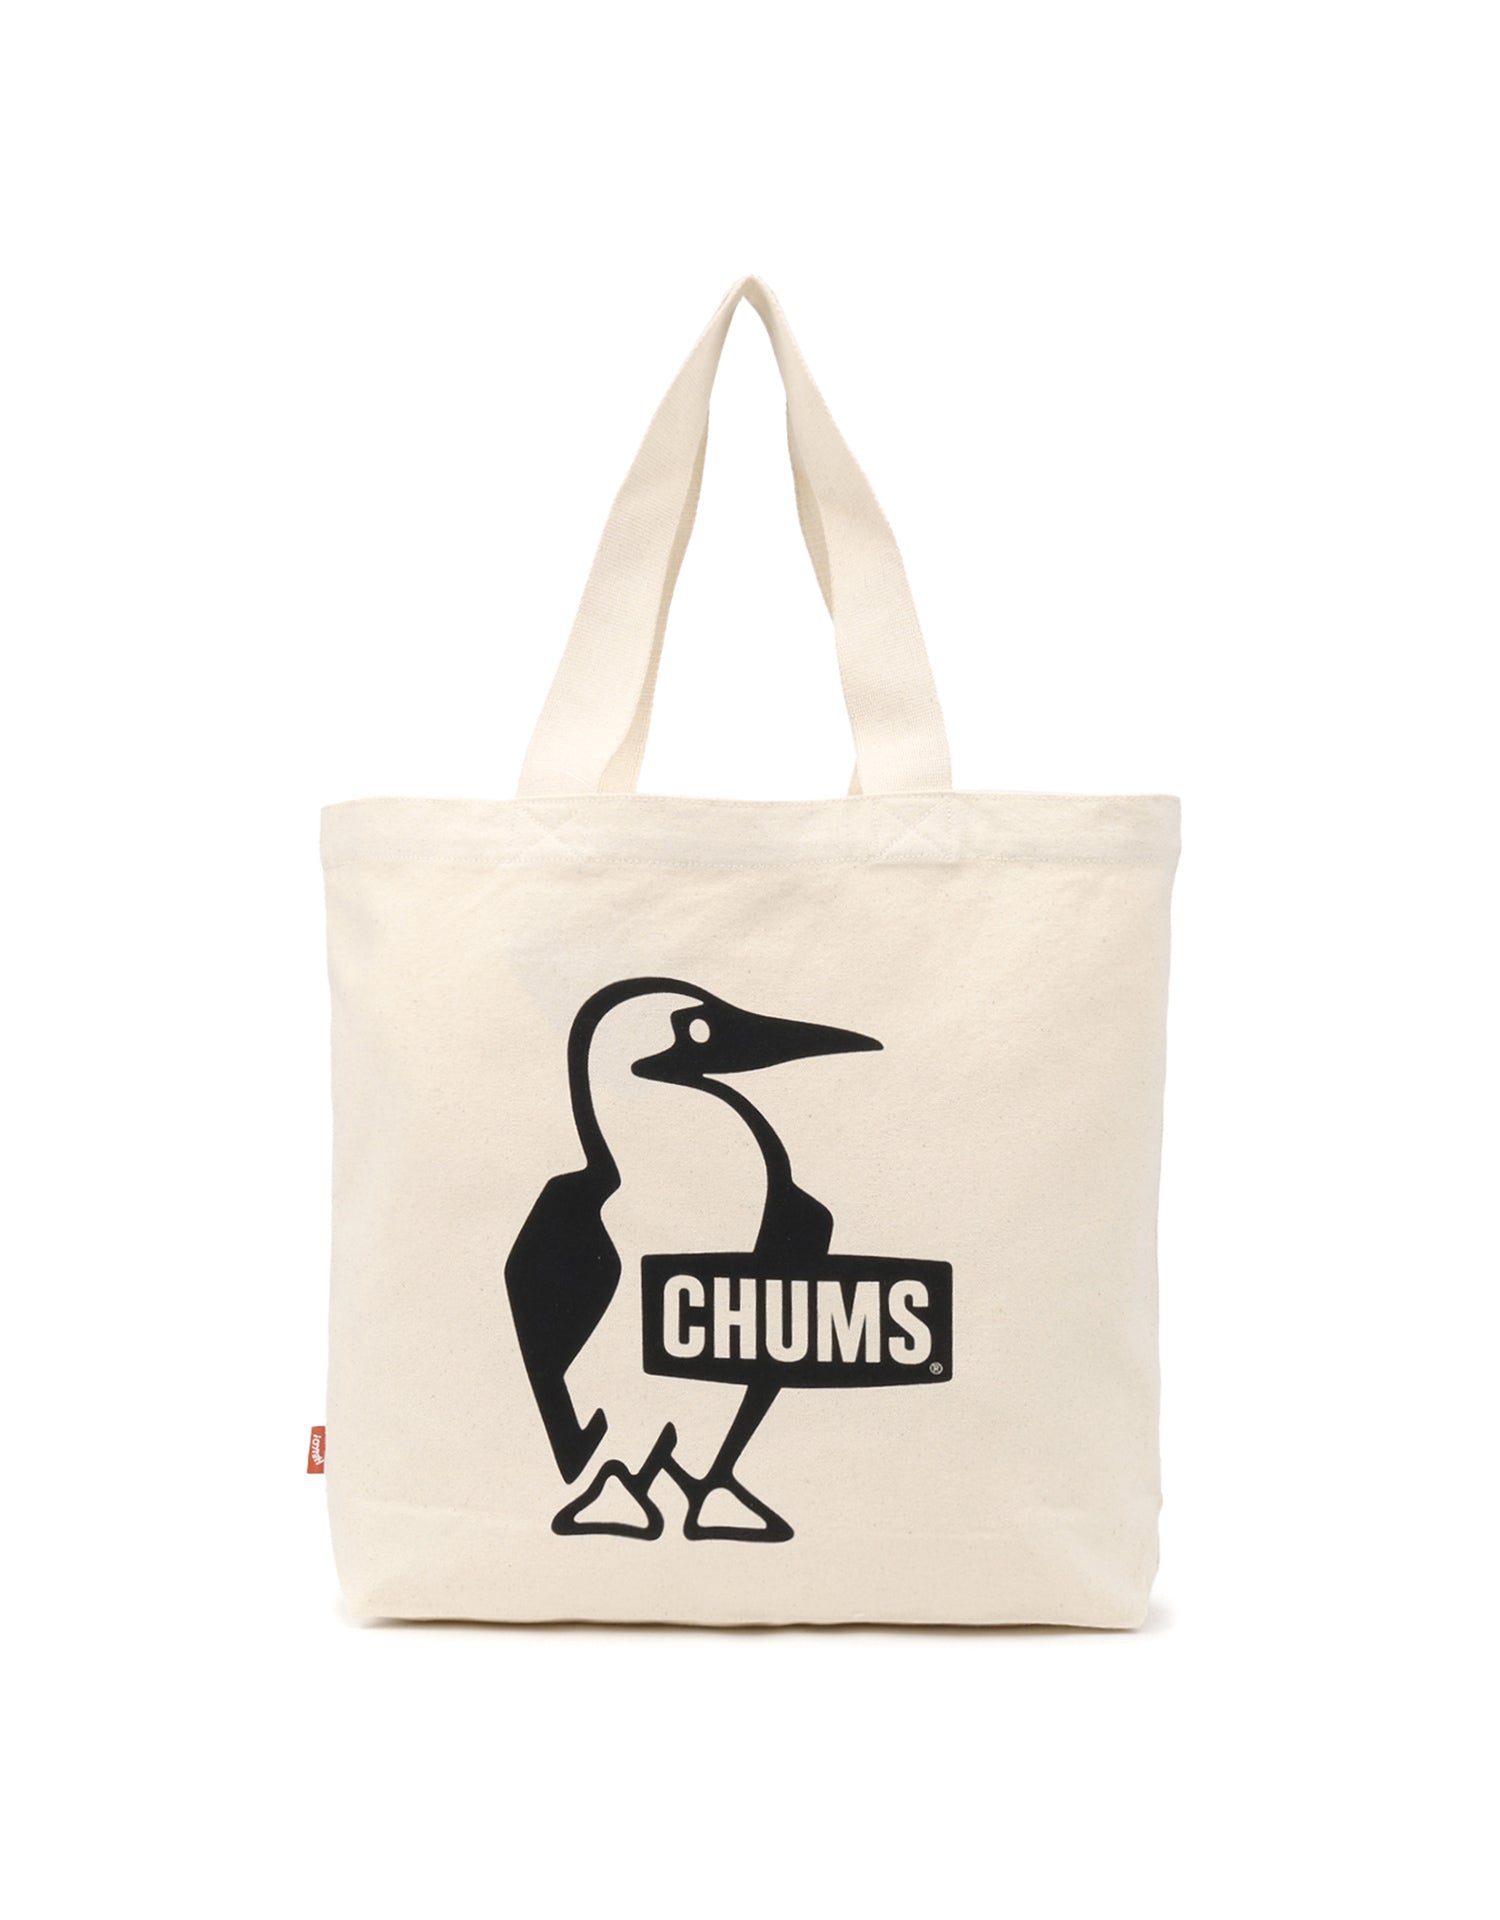 Chums 40 Years Canvas Tote Bag